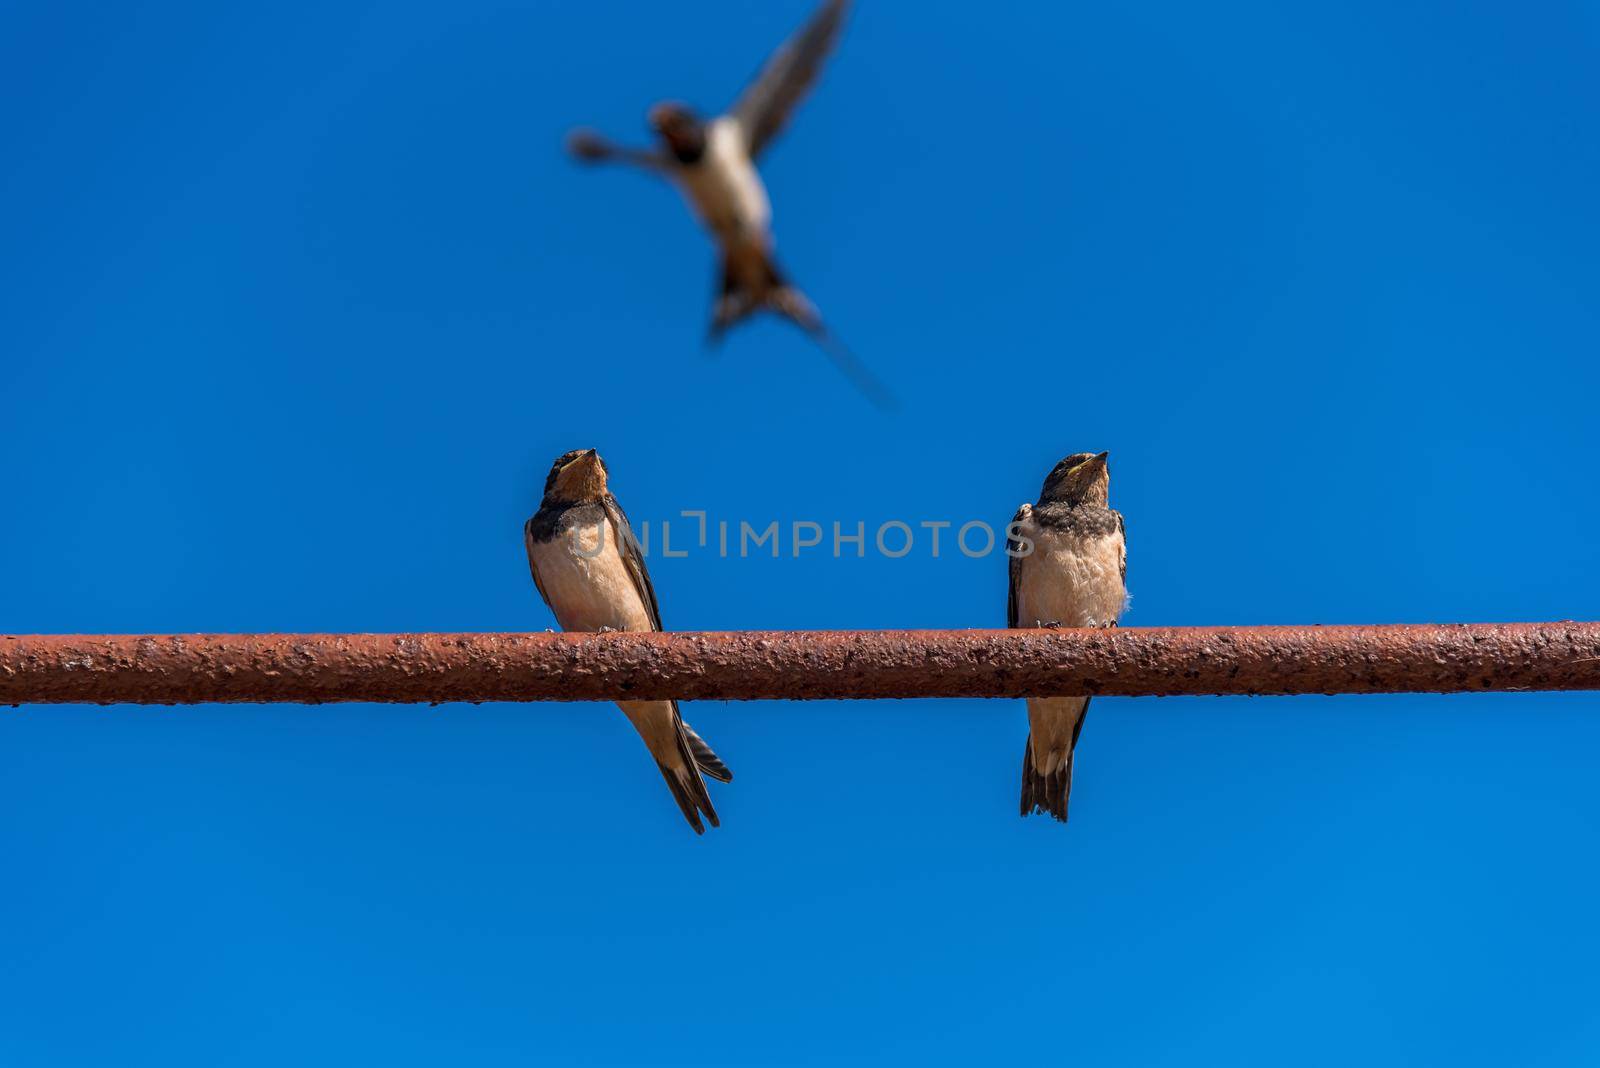 Swallows on the wires. Swallows against the blue sky. The swallo